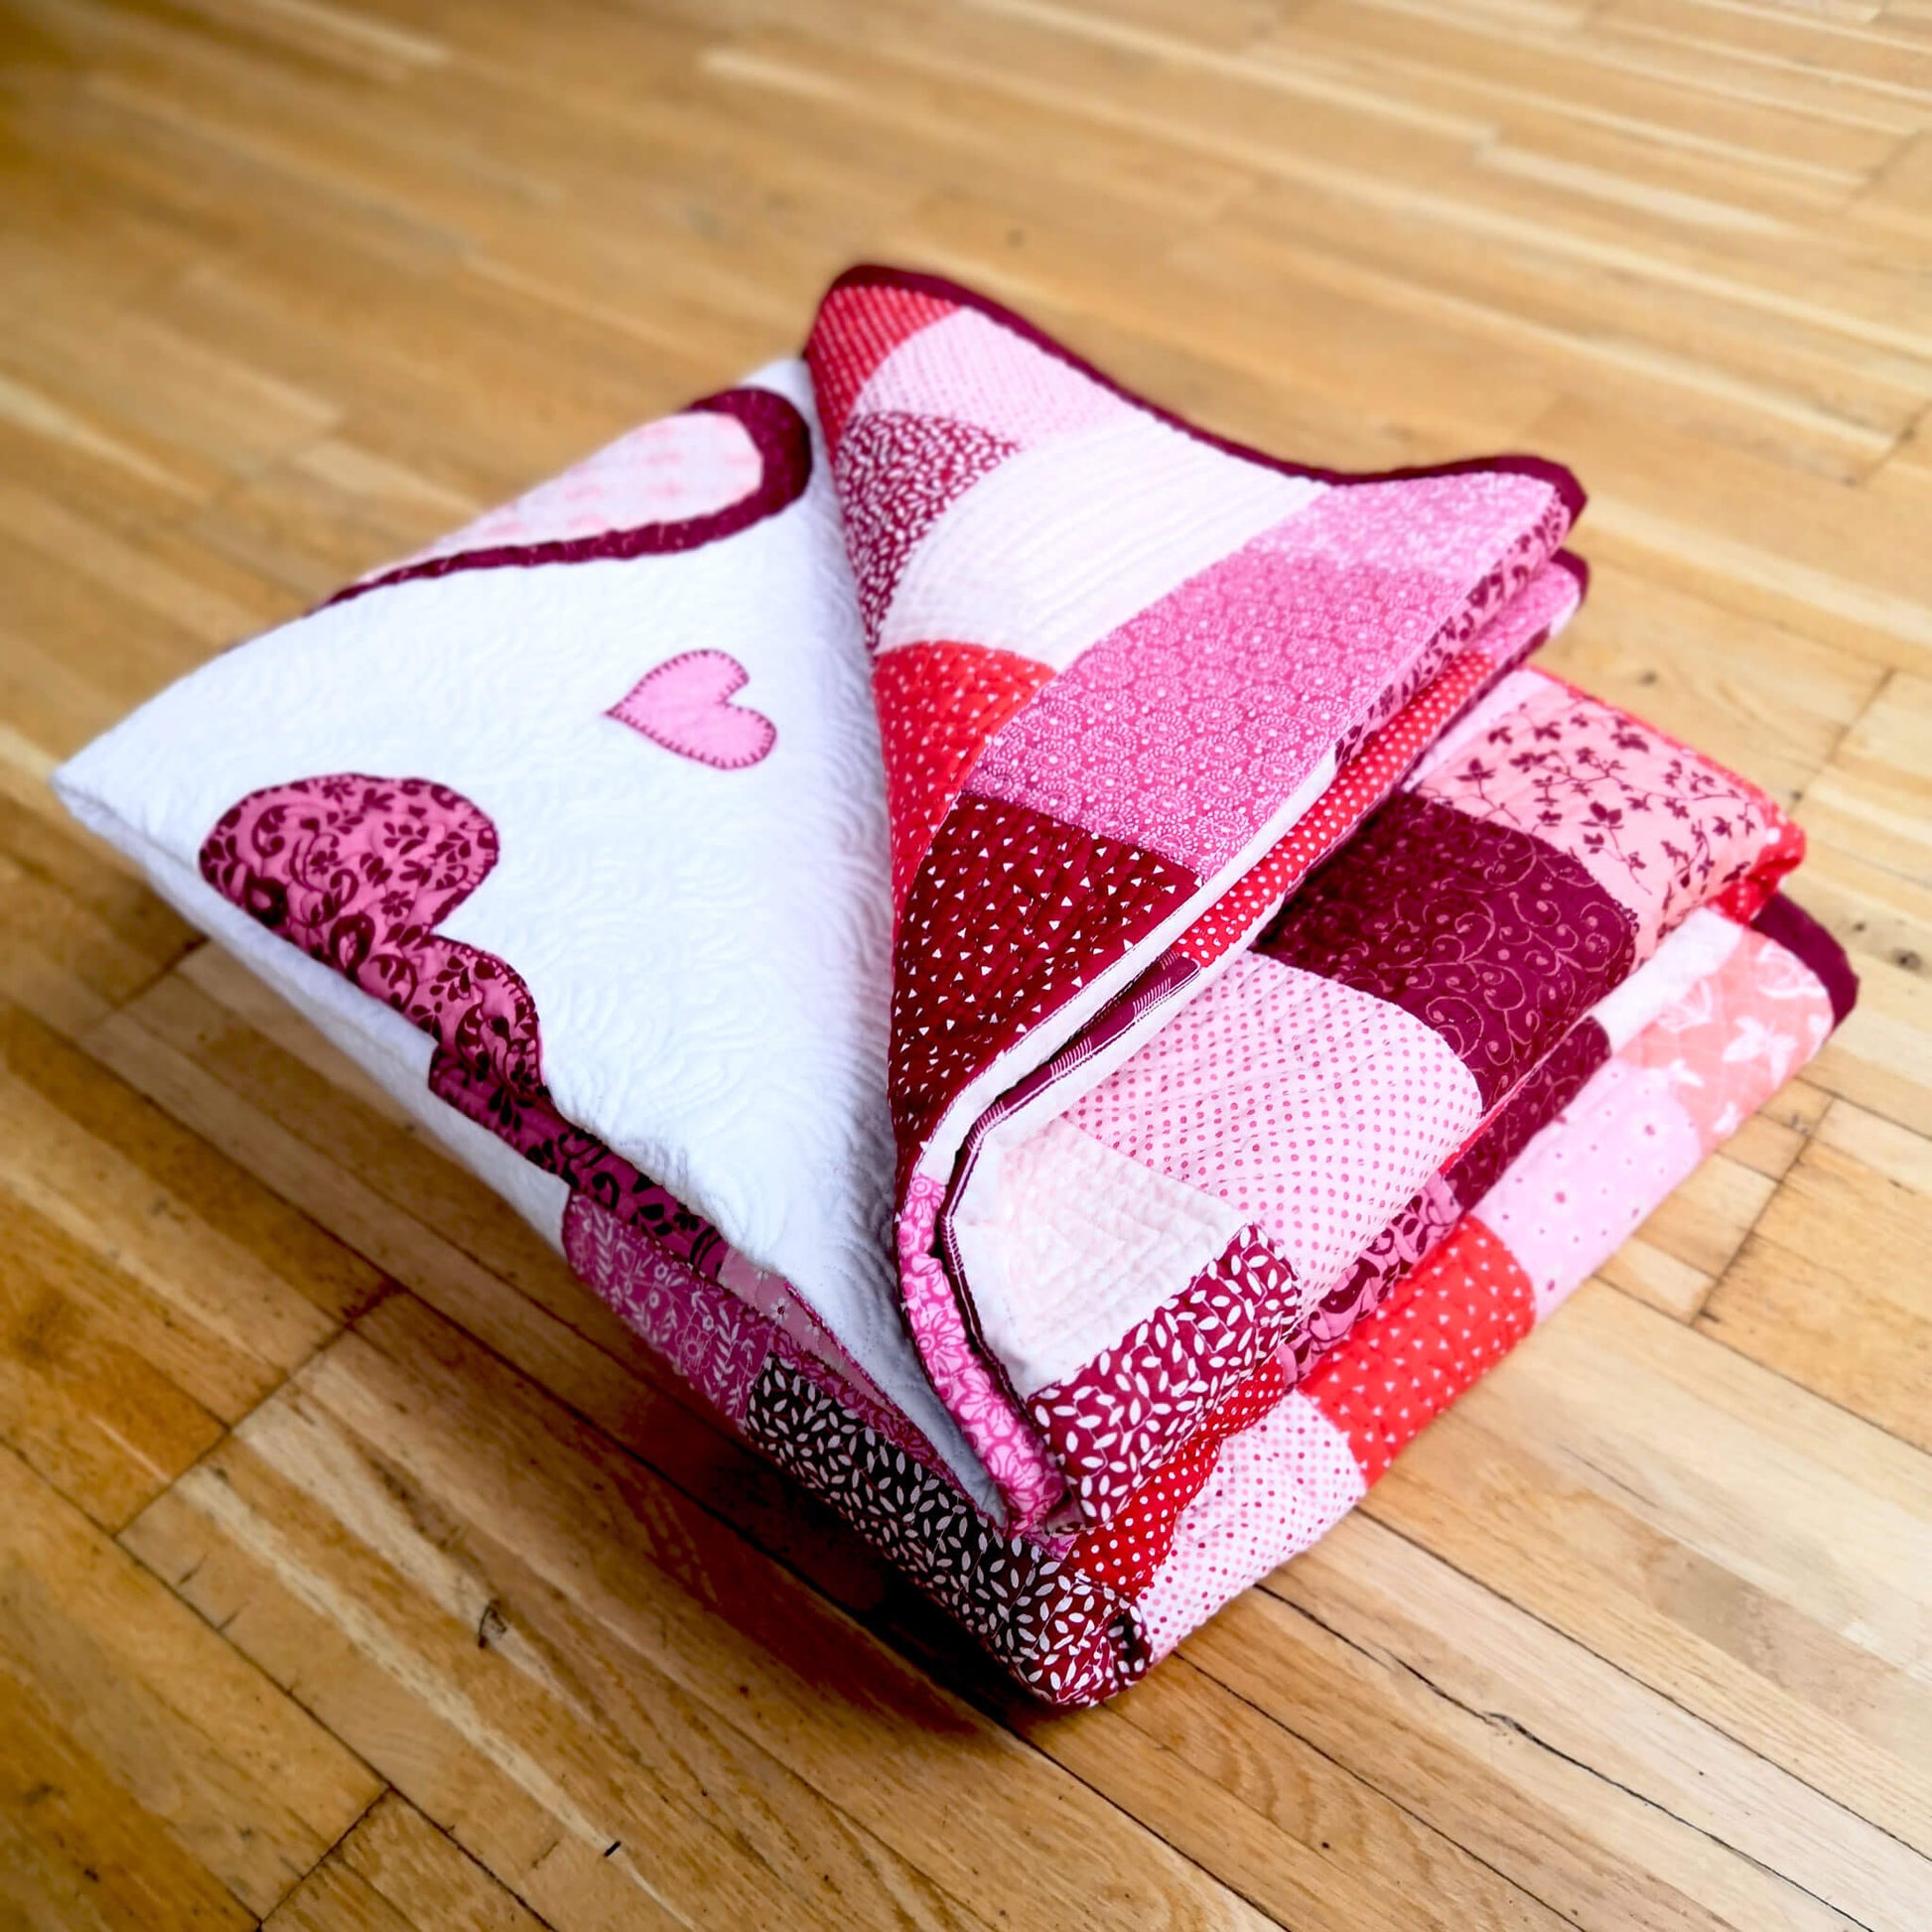 Heart appliqued on a quilt